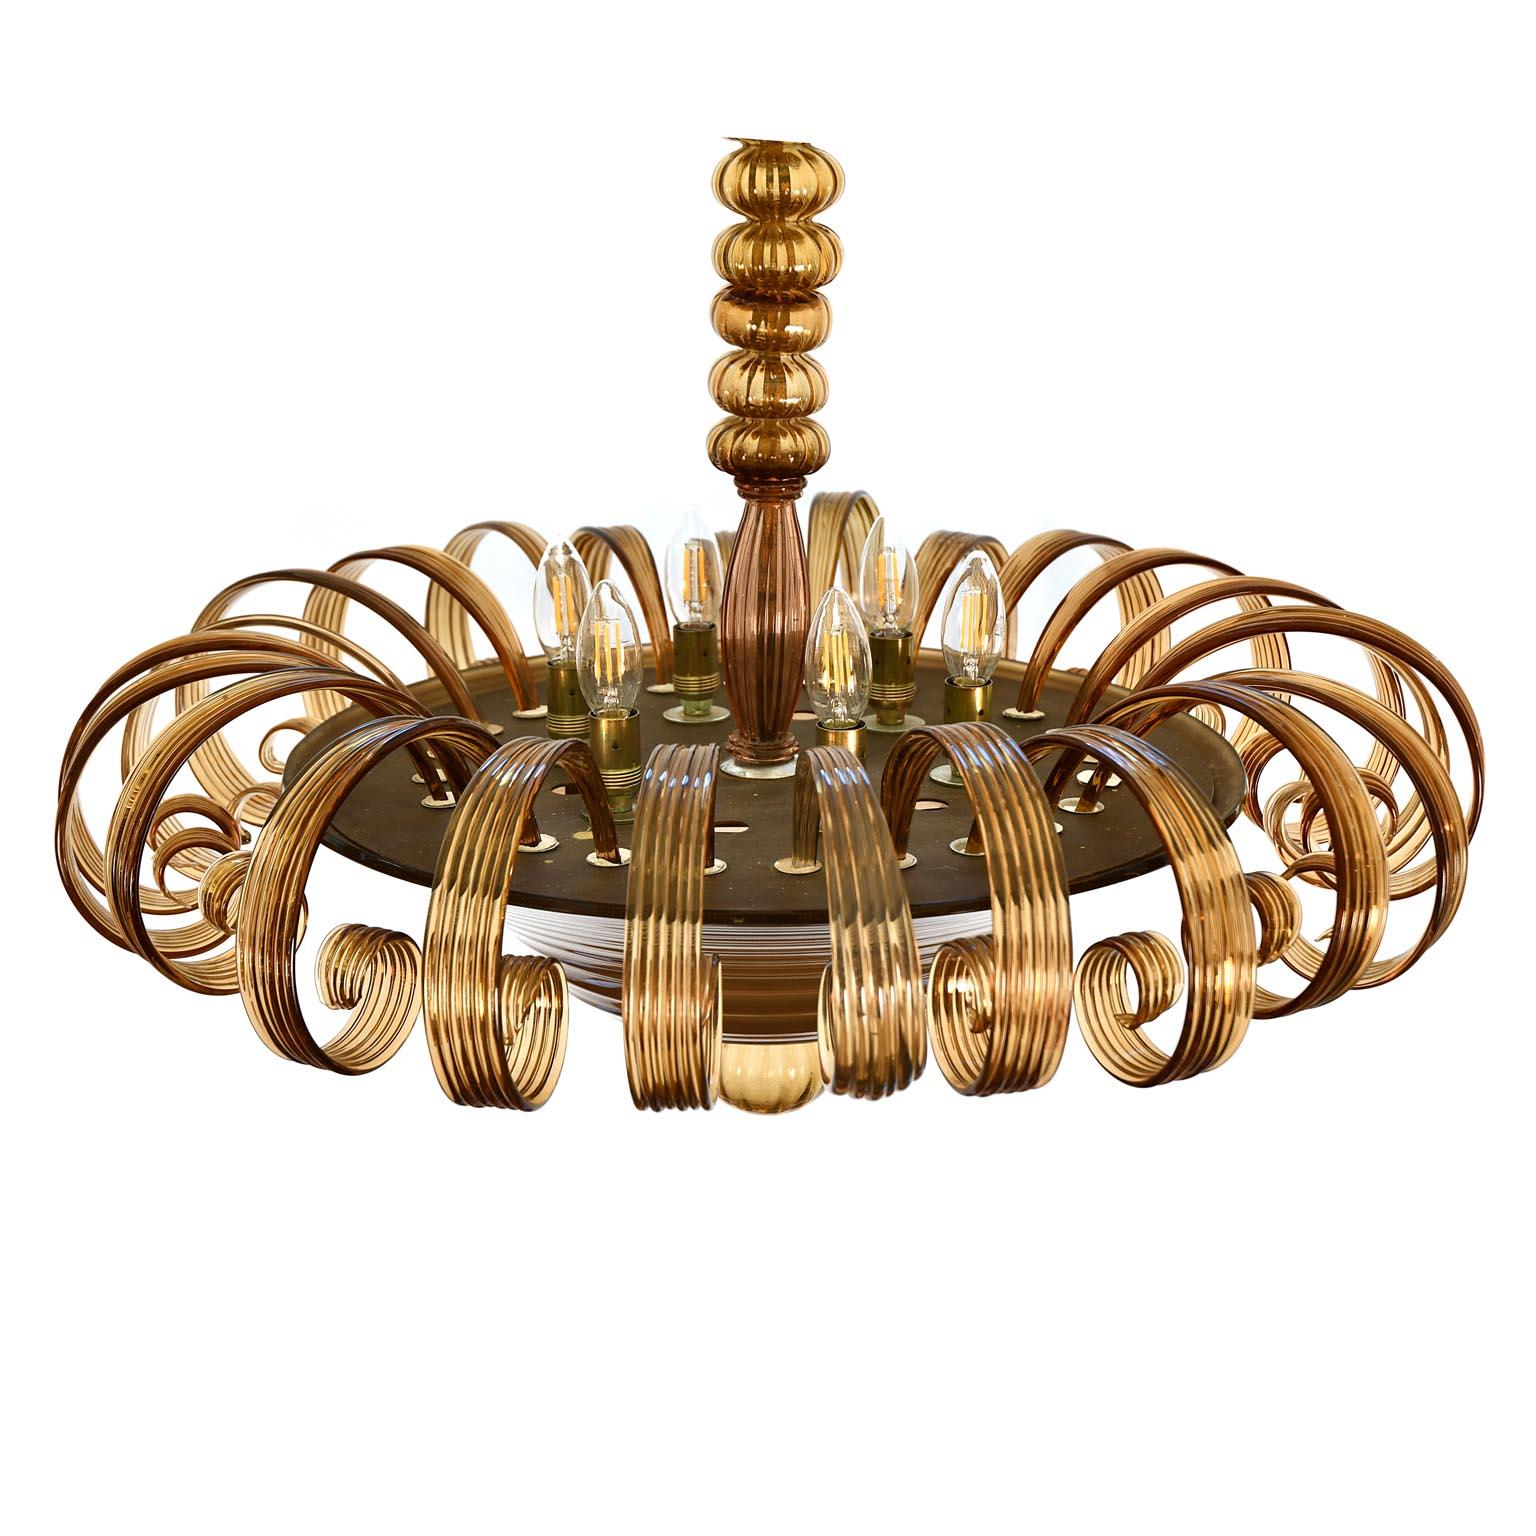 Mid-20th Century Brown Italian Glass Chandelier Murano Mid-Century Modern 23 Curl Arms